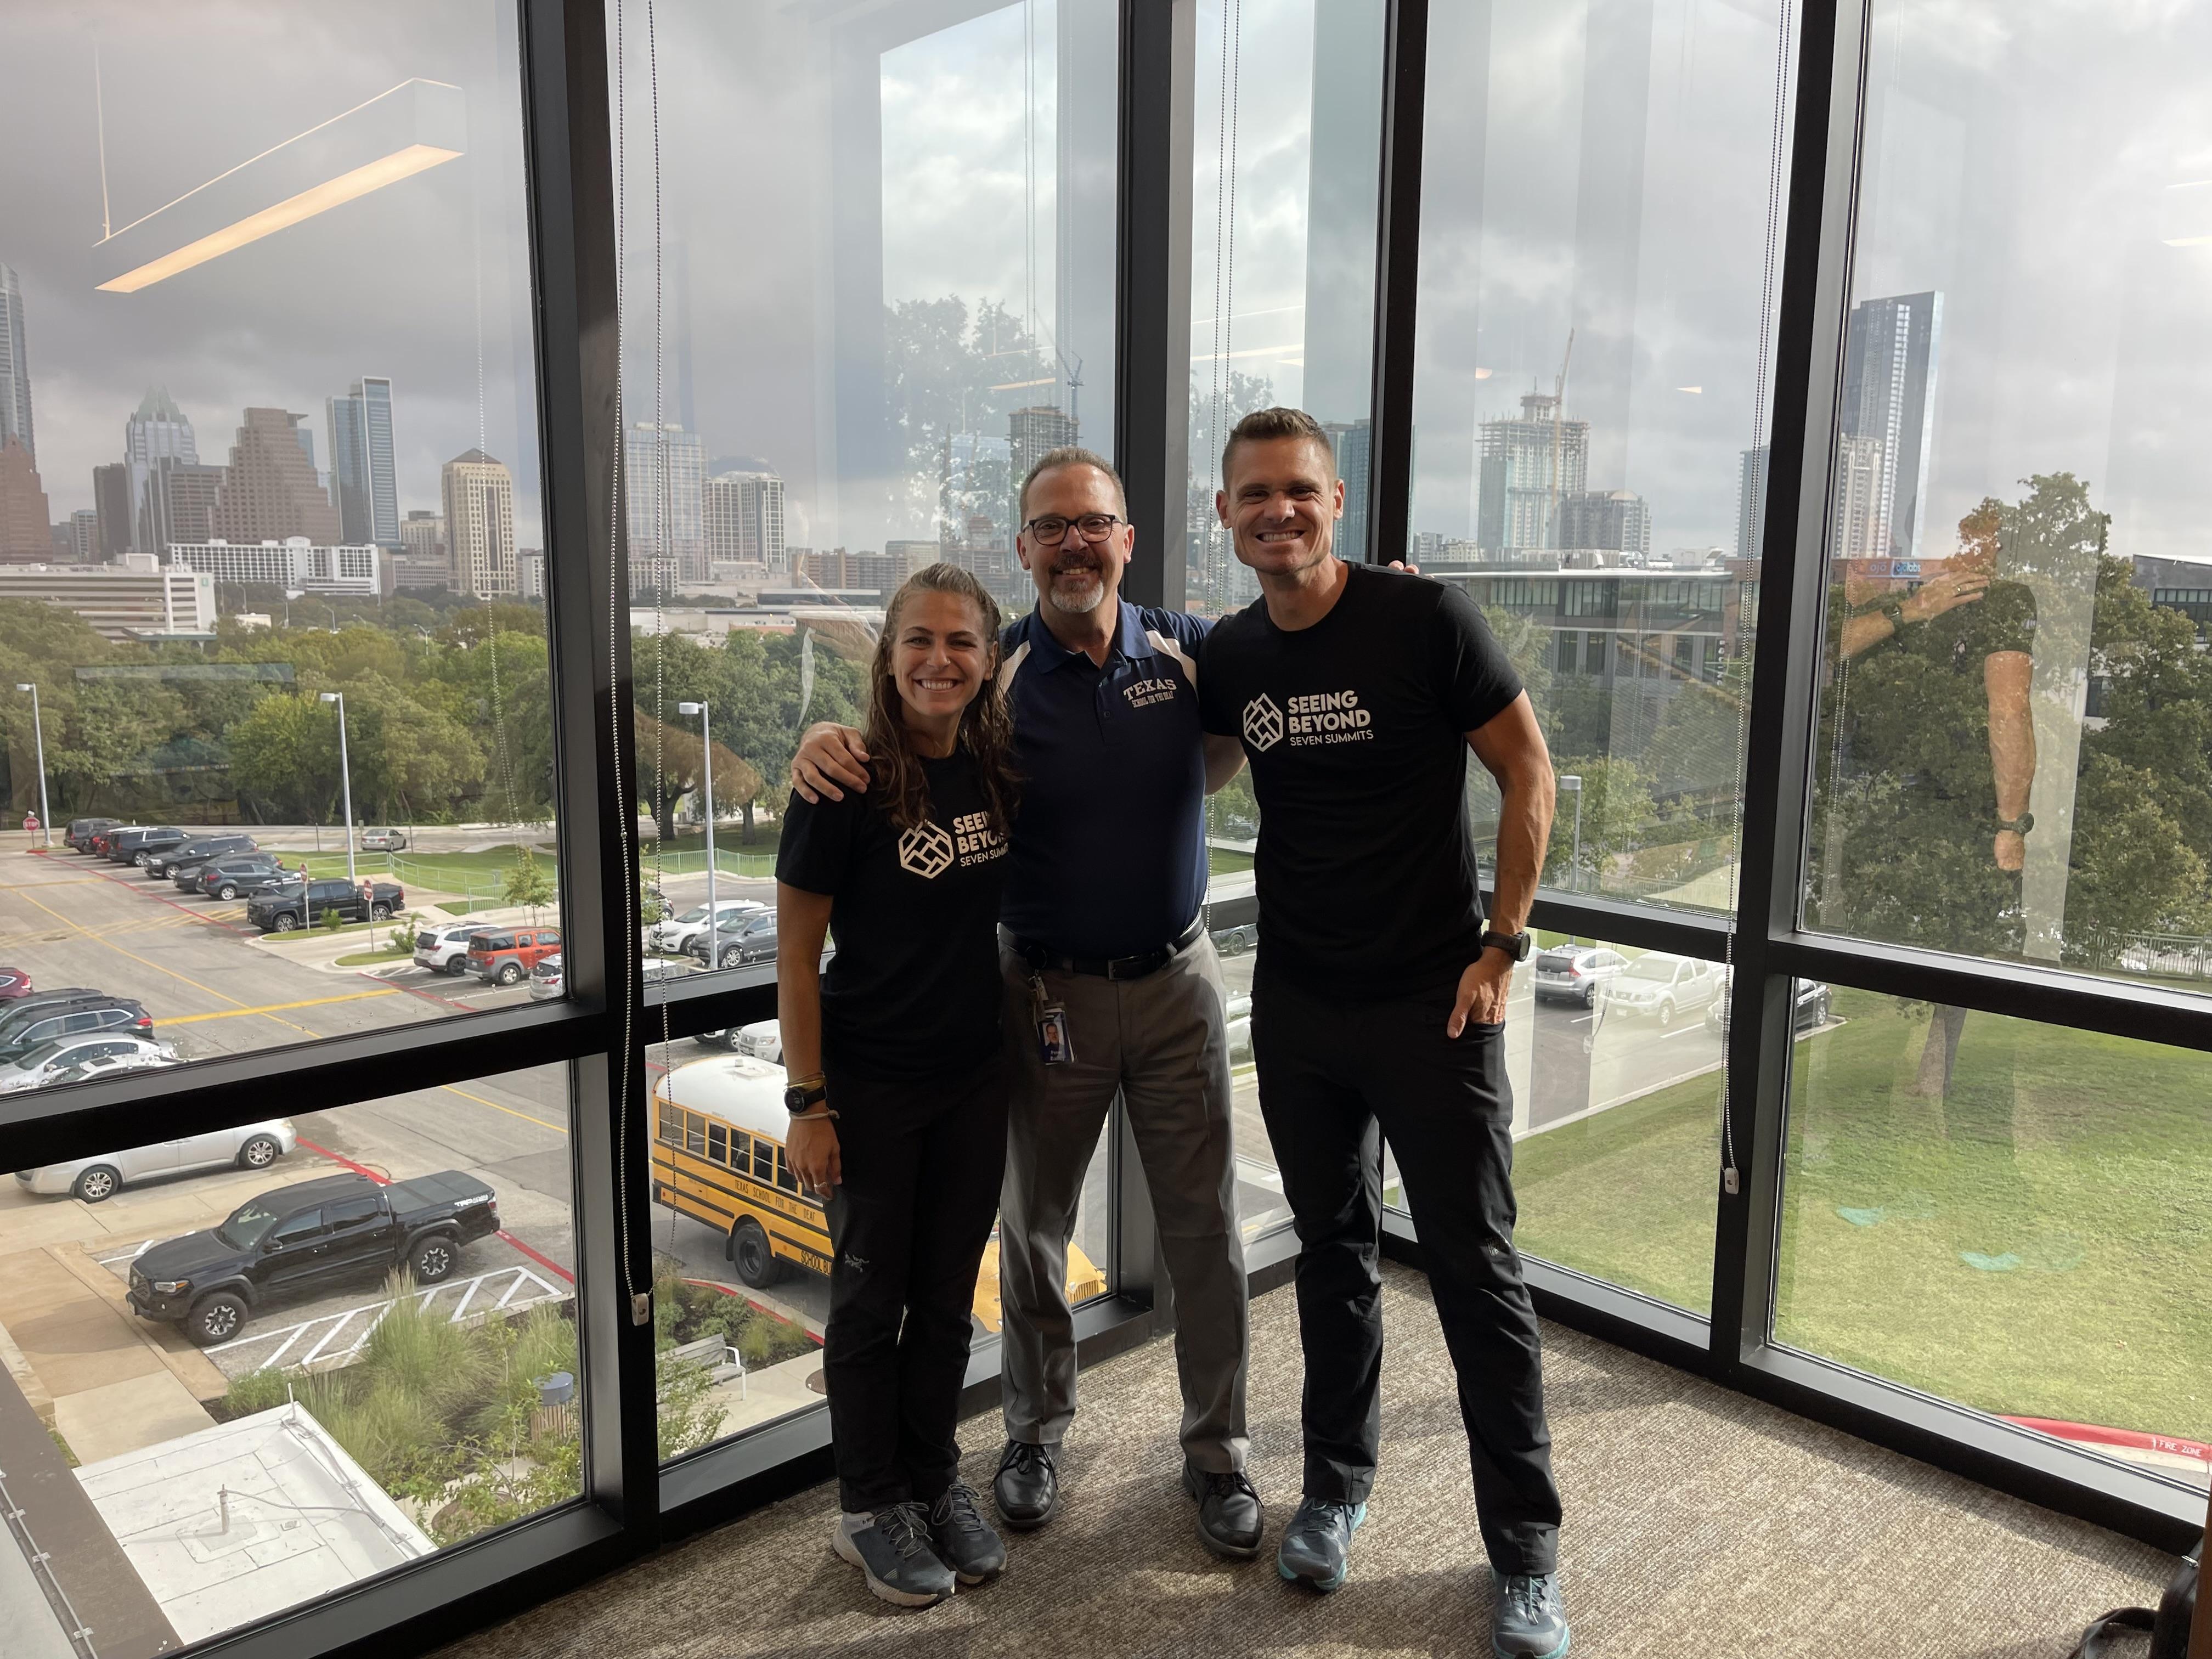 Peter Bailey is standing between two deaf mountaineers, wearing TSD blue polo shirt and gray pants. The deaf mountaineers wore black shirts with their logo on the middle and the text: Seeing Beyond Seven Summits. The background is Austin's skyline with cloudy weather.